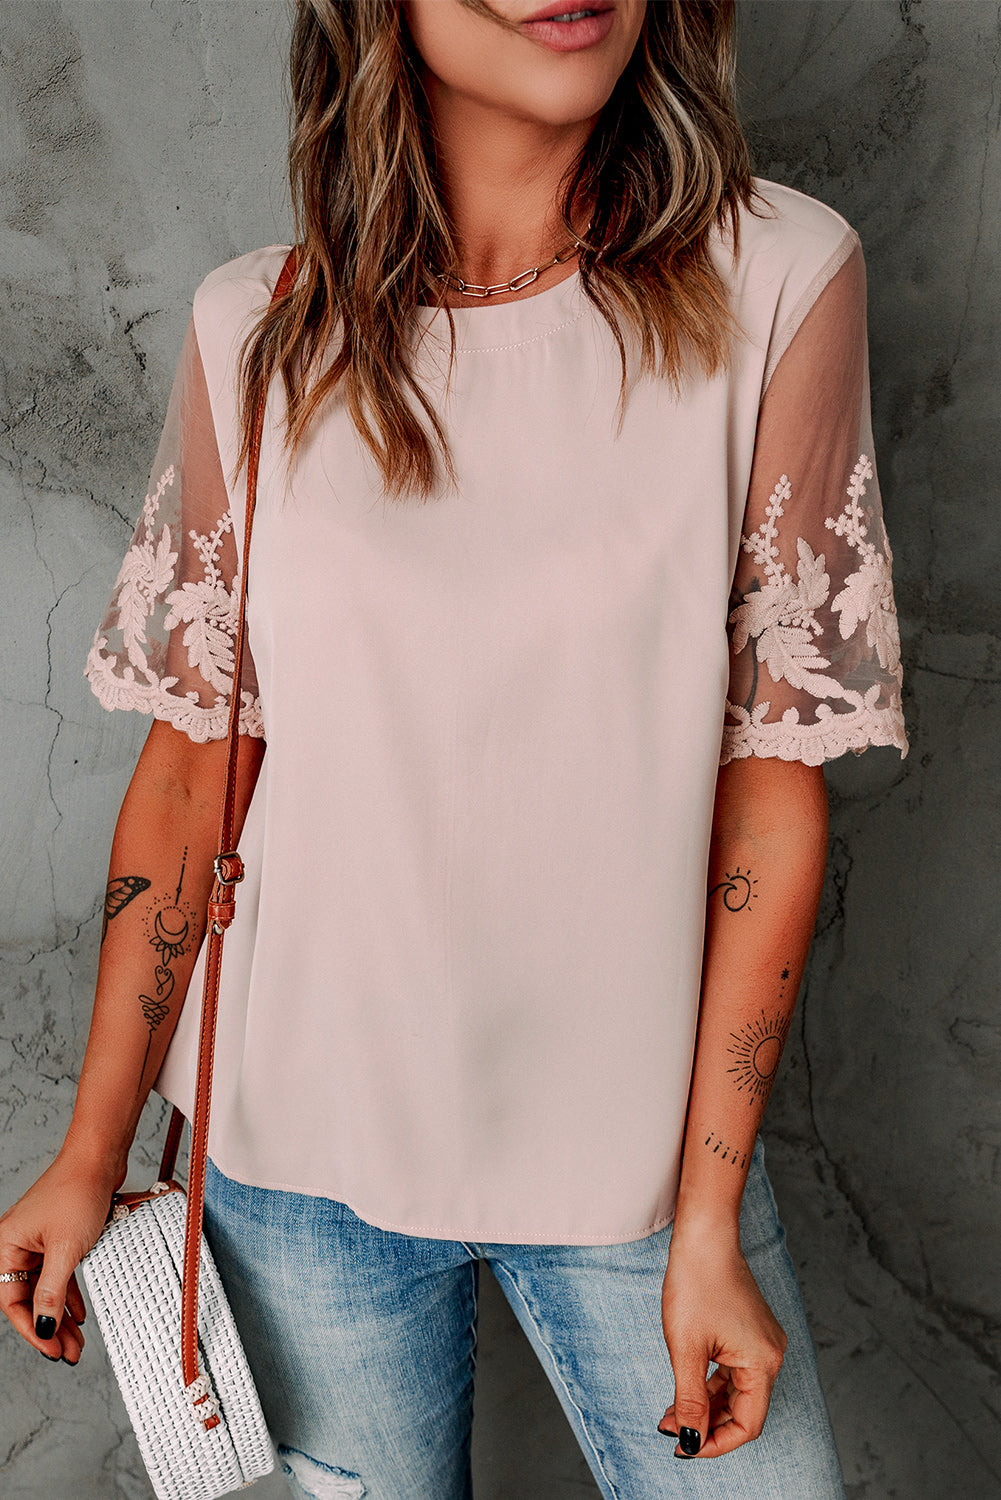 Chic Apricot Floral Lace Short Sleeve Top